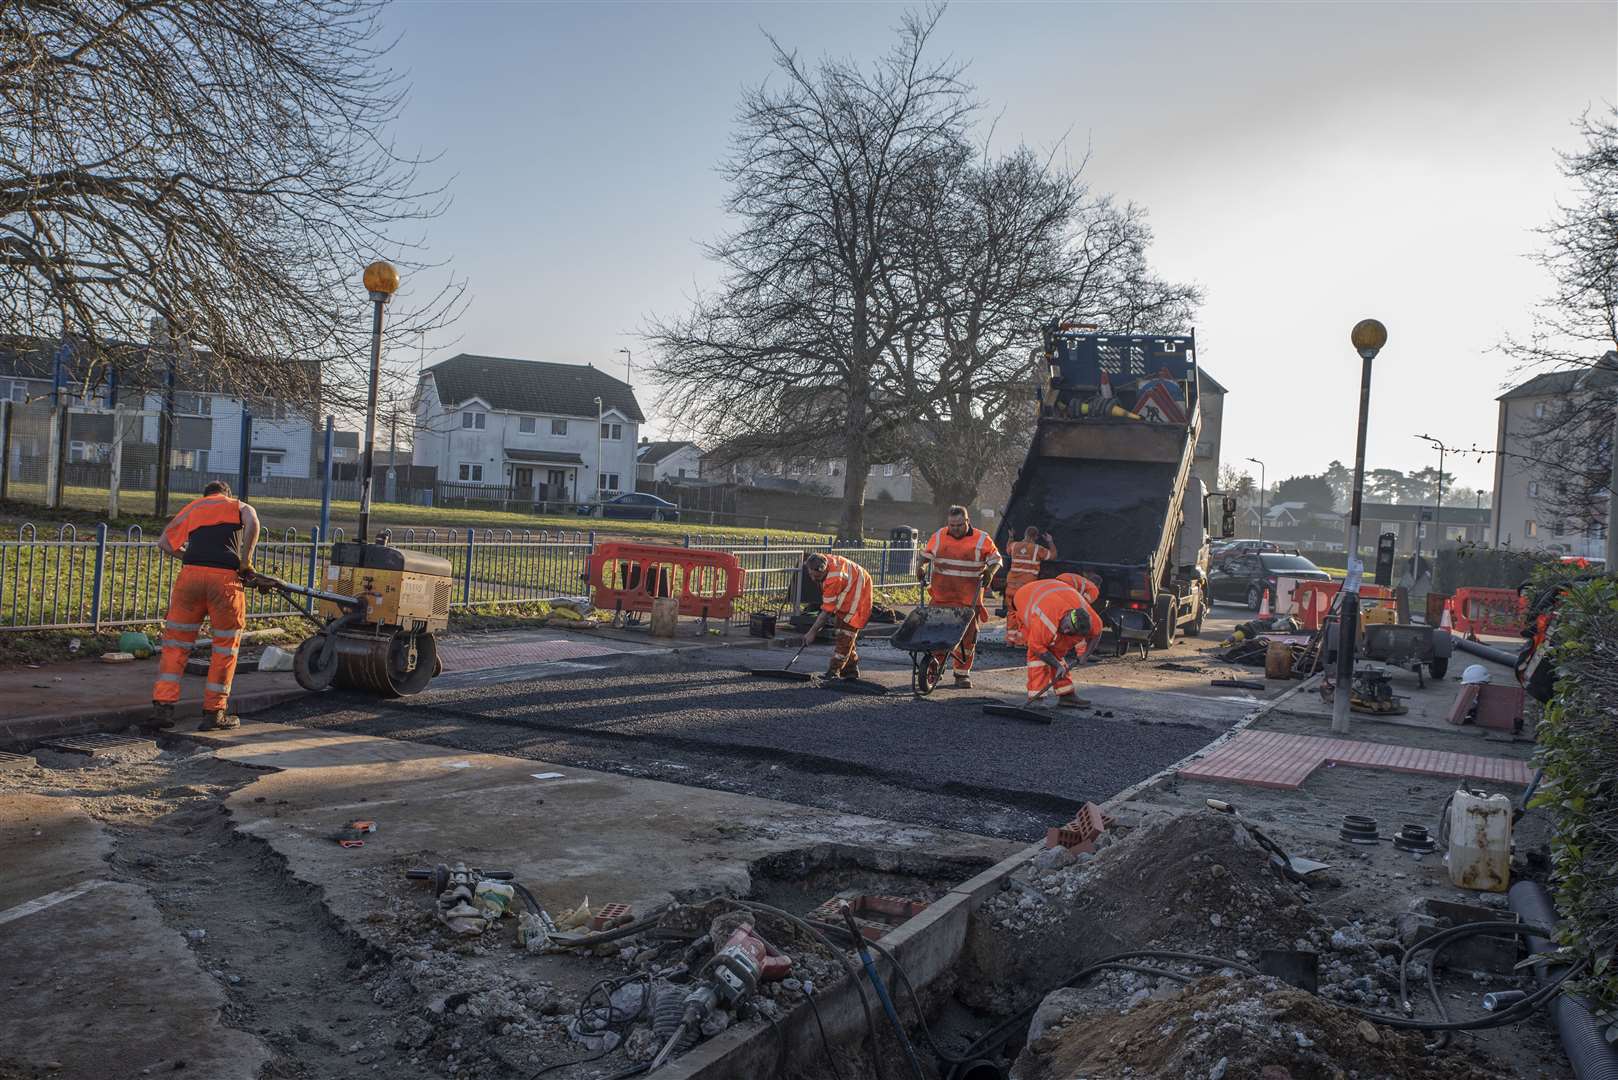 Progress is being made on the raised zebra crossing. Picture: Ellie Crook